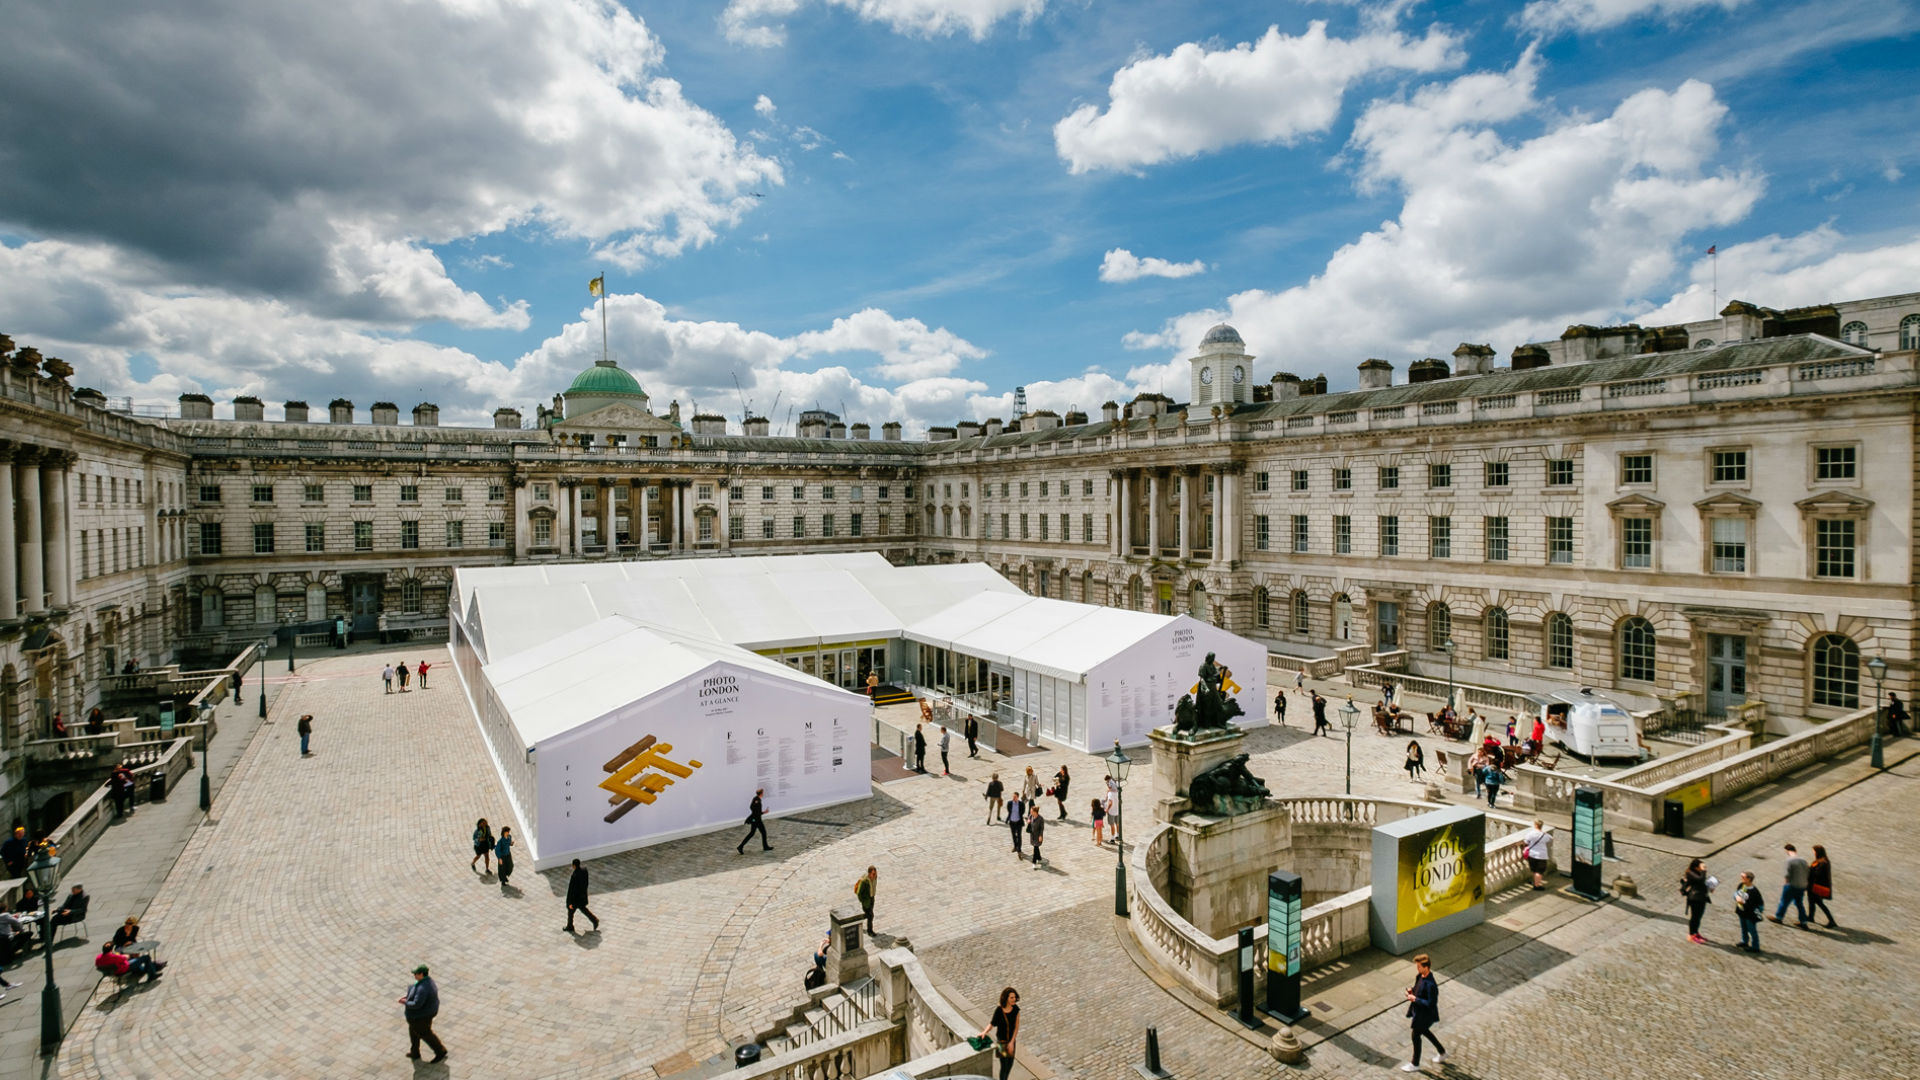 The Photo London tented village in Somerset House's courtyard. Image courtesy of Photo London